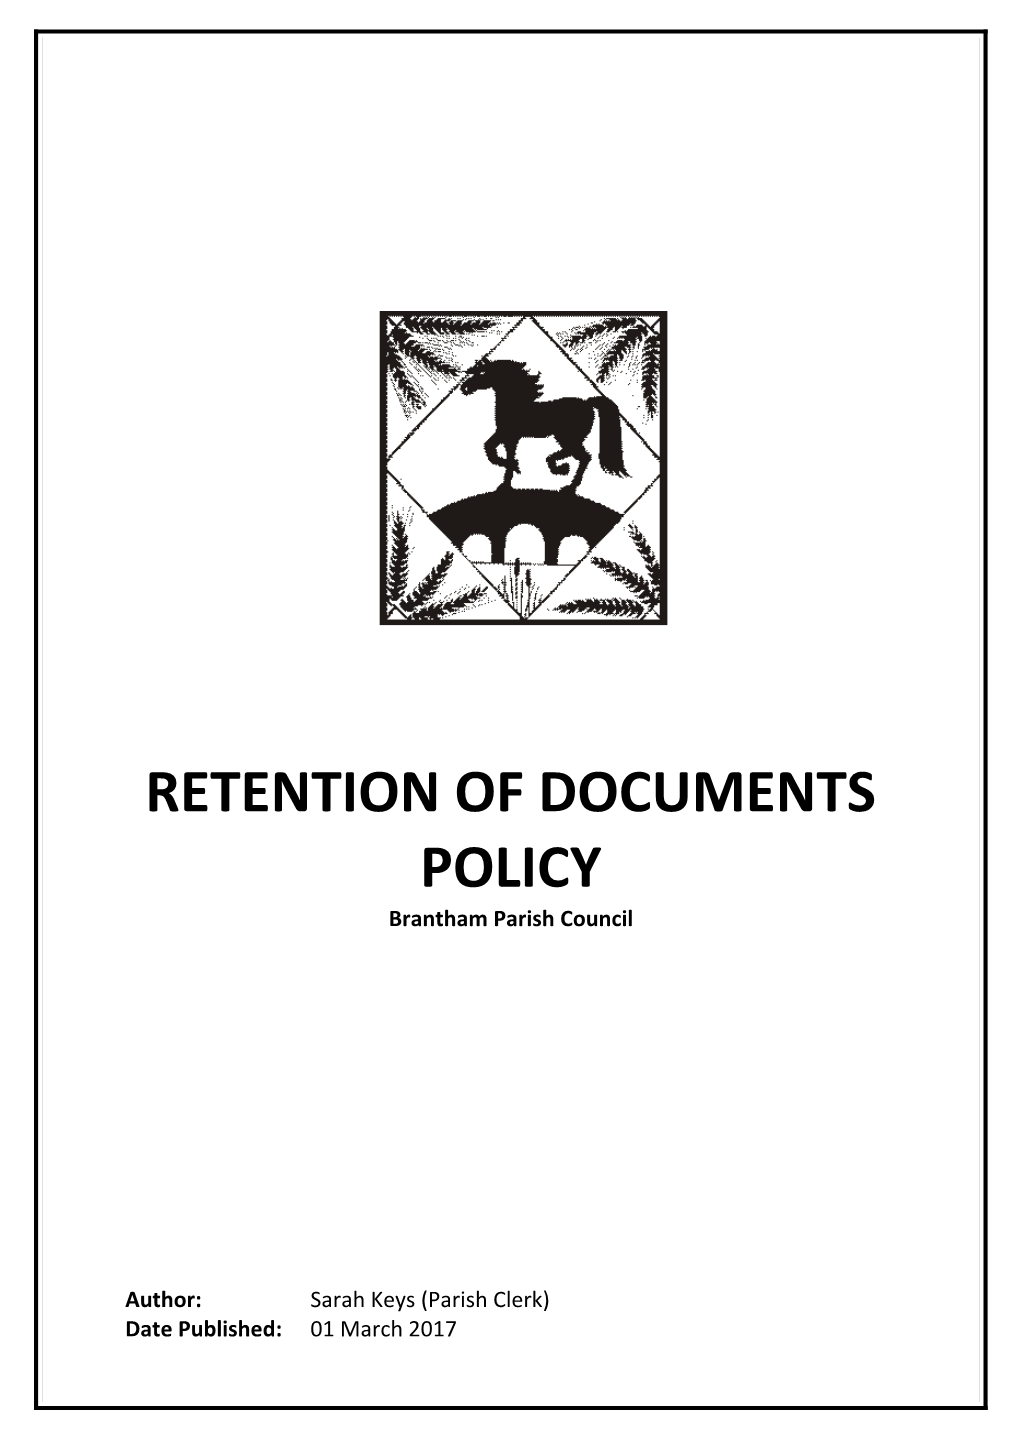 Retention of Documents Policy